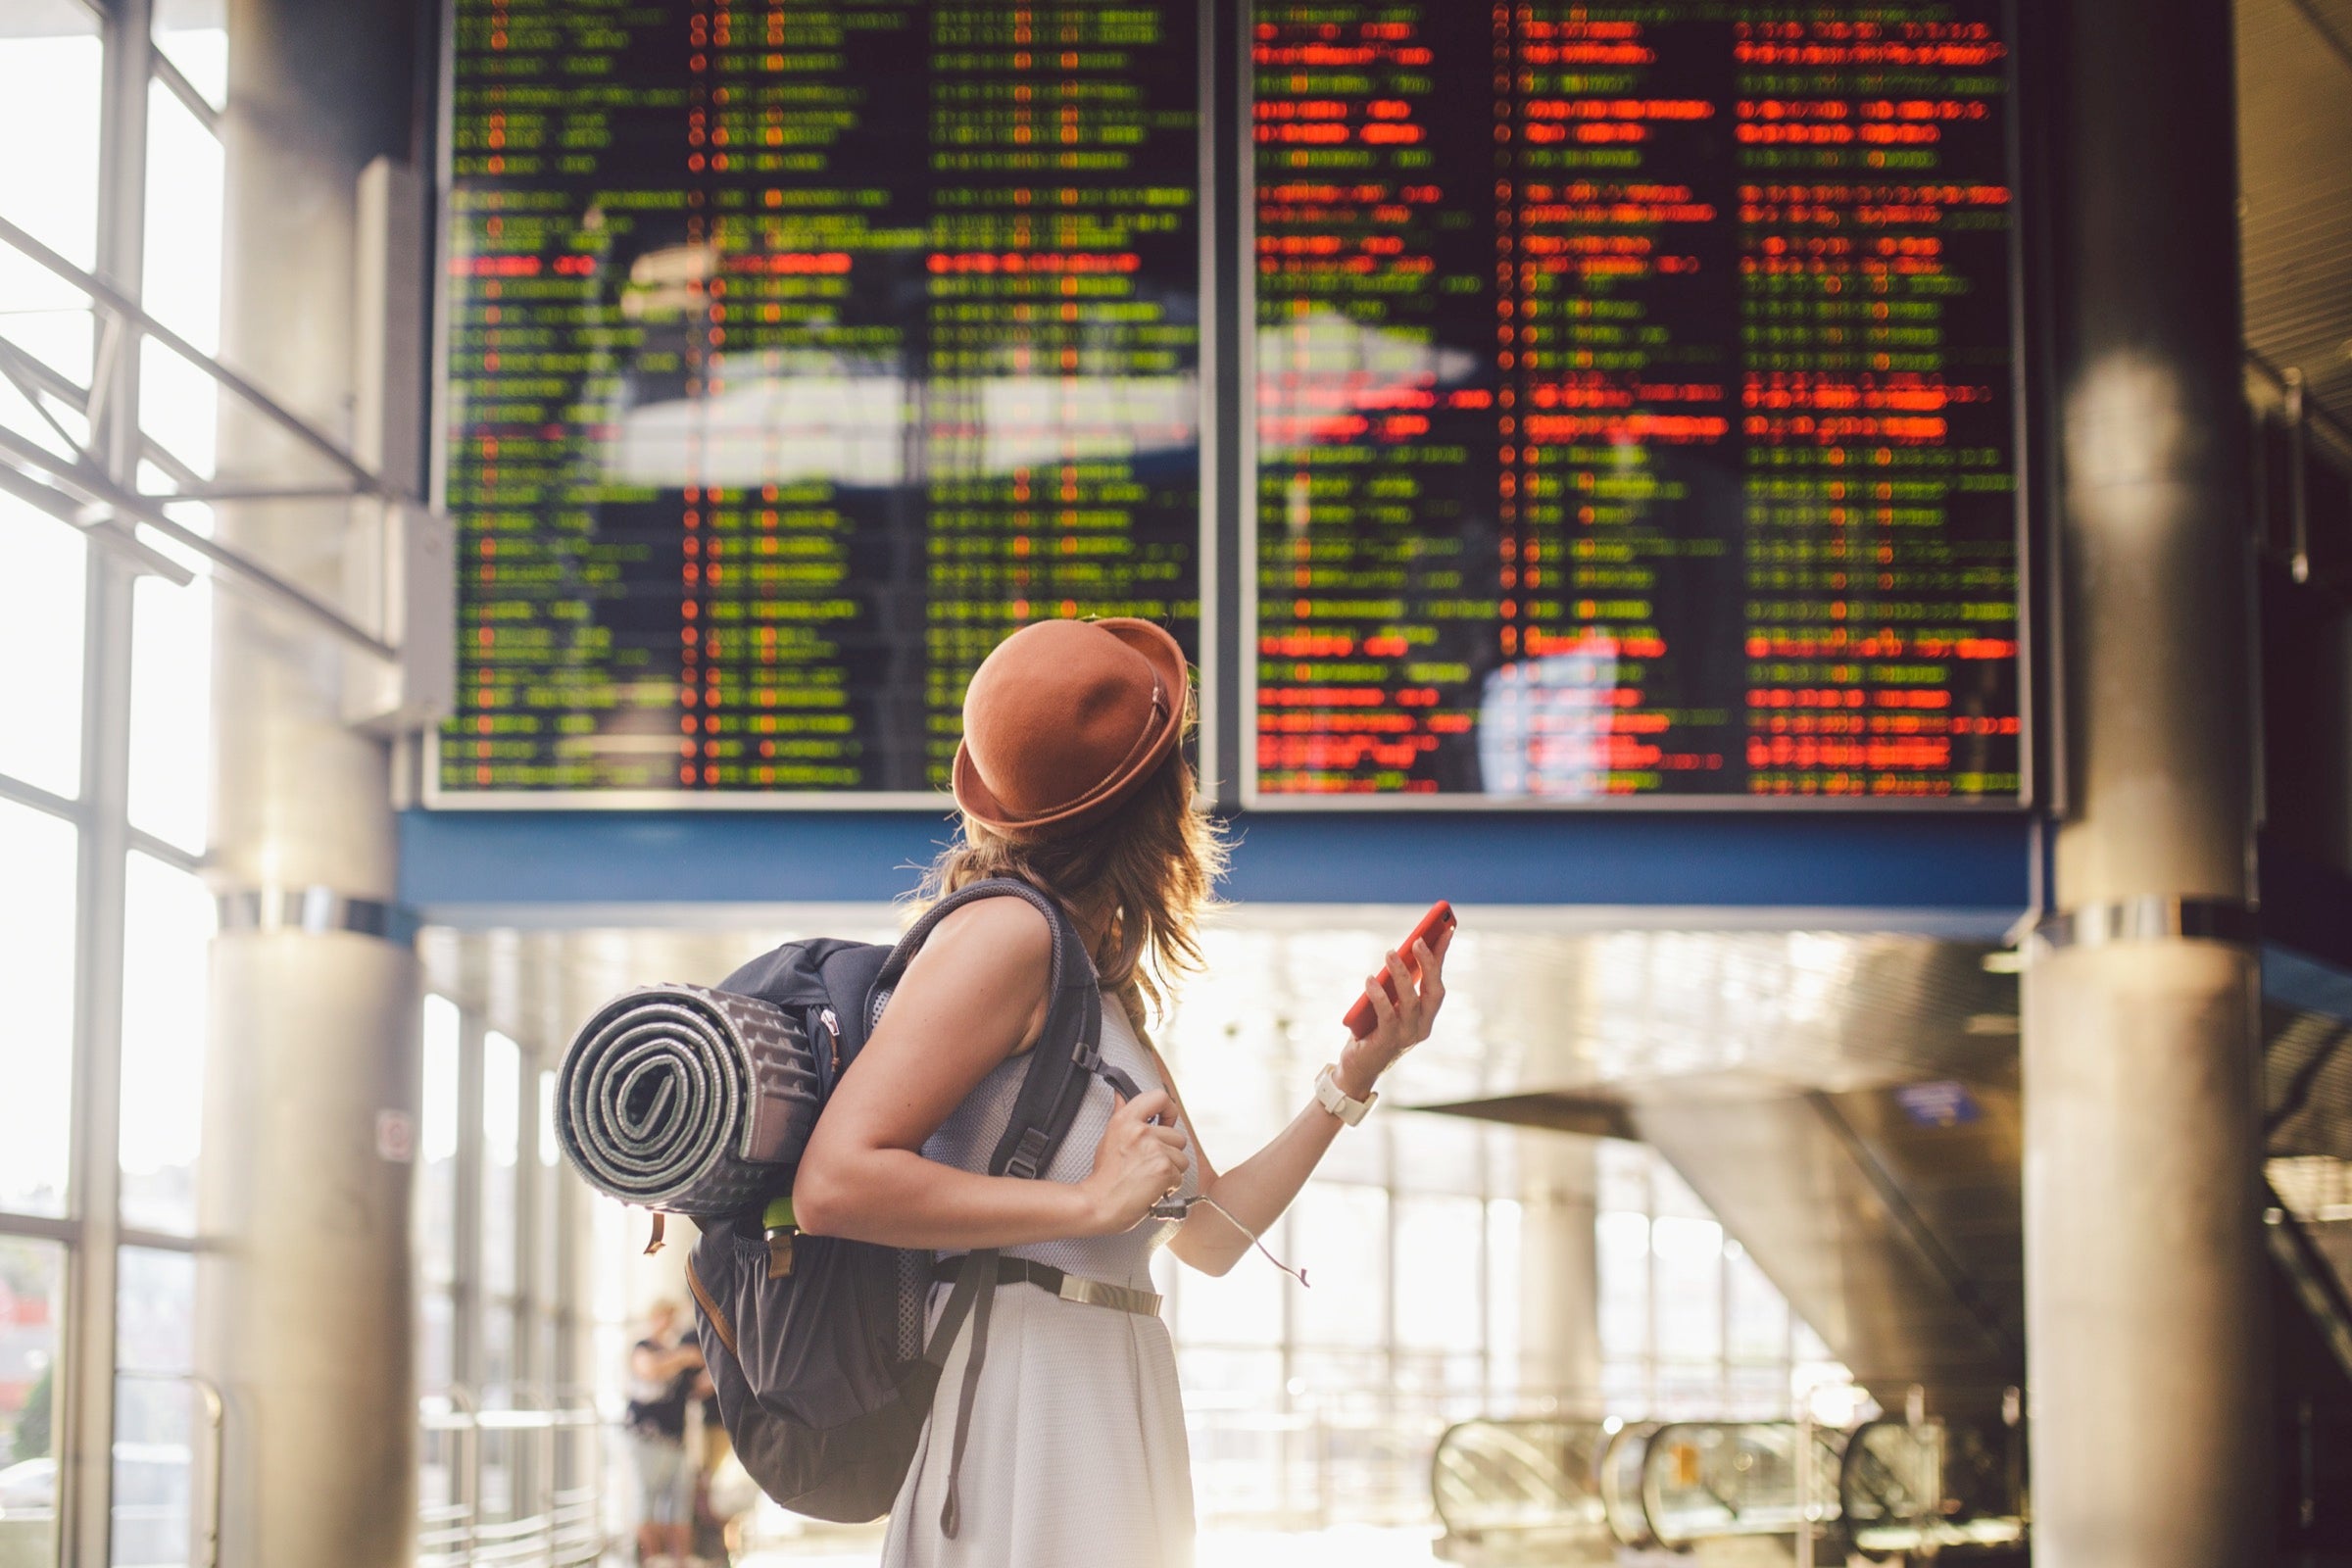 Female solo traveler in front of a flight board at an airport